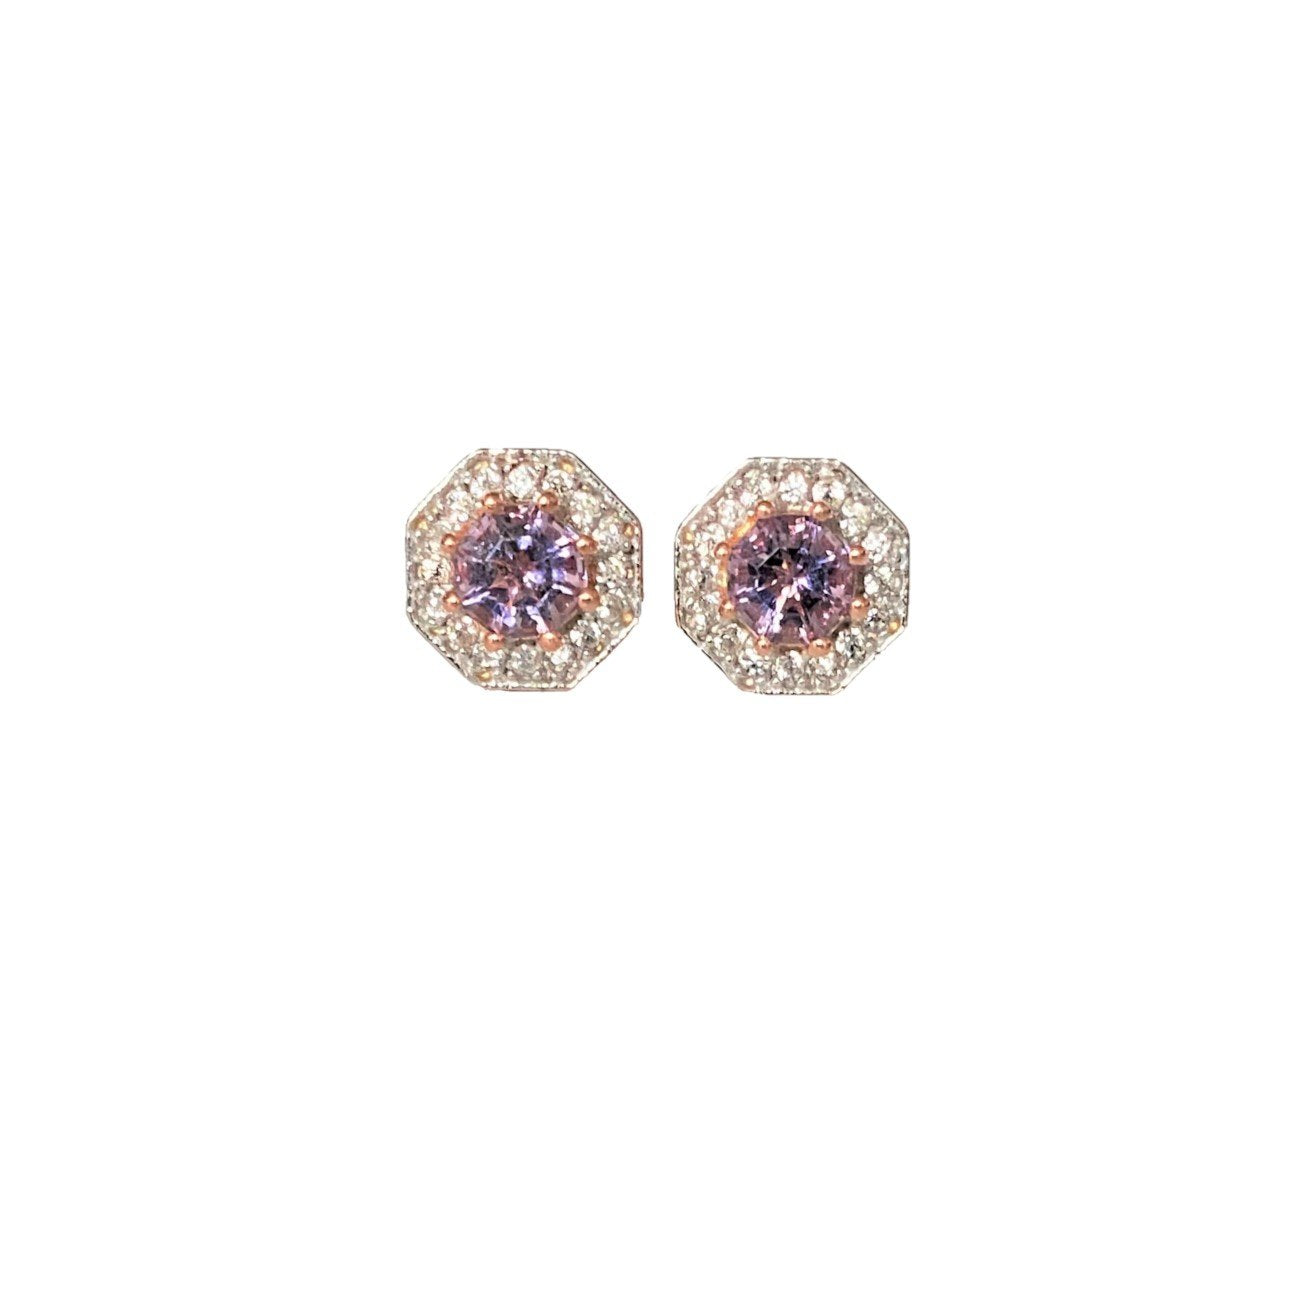 2.5 ct. Pink Amethyst & Natural White Zircon Halo Stud Earrings,18K Rose Gold Plated Silver February Birthstone fine jewelry gift for women